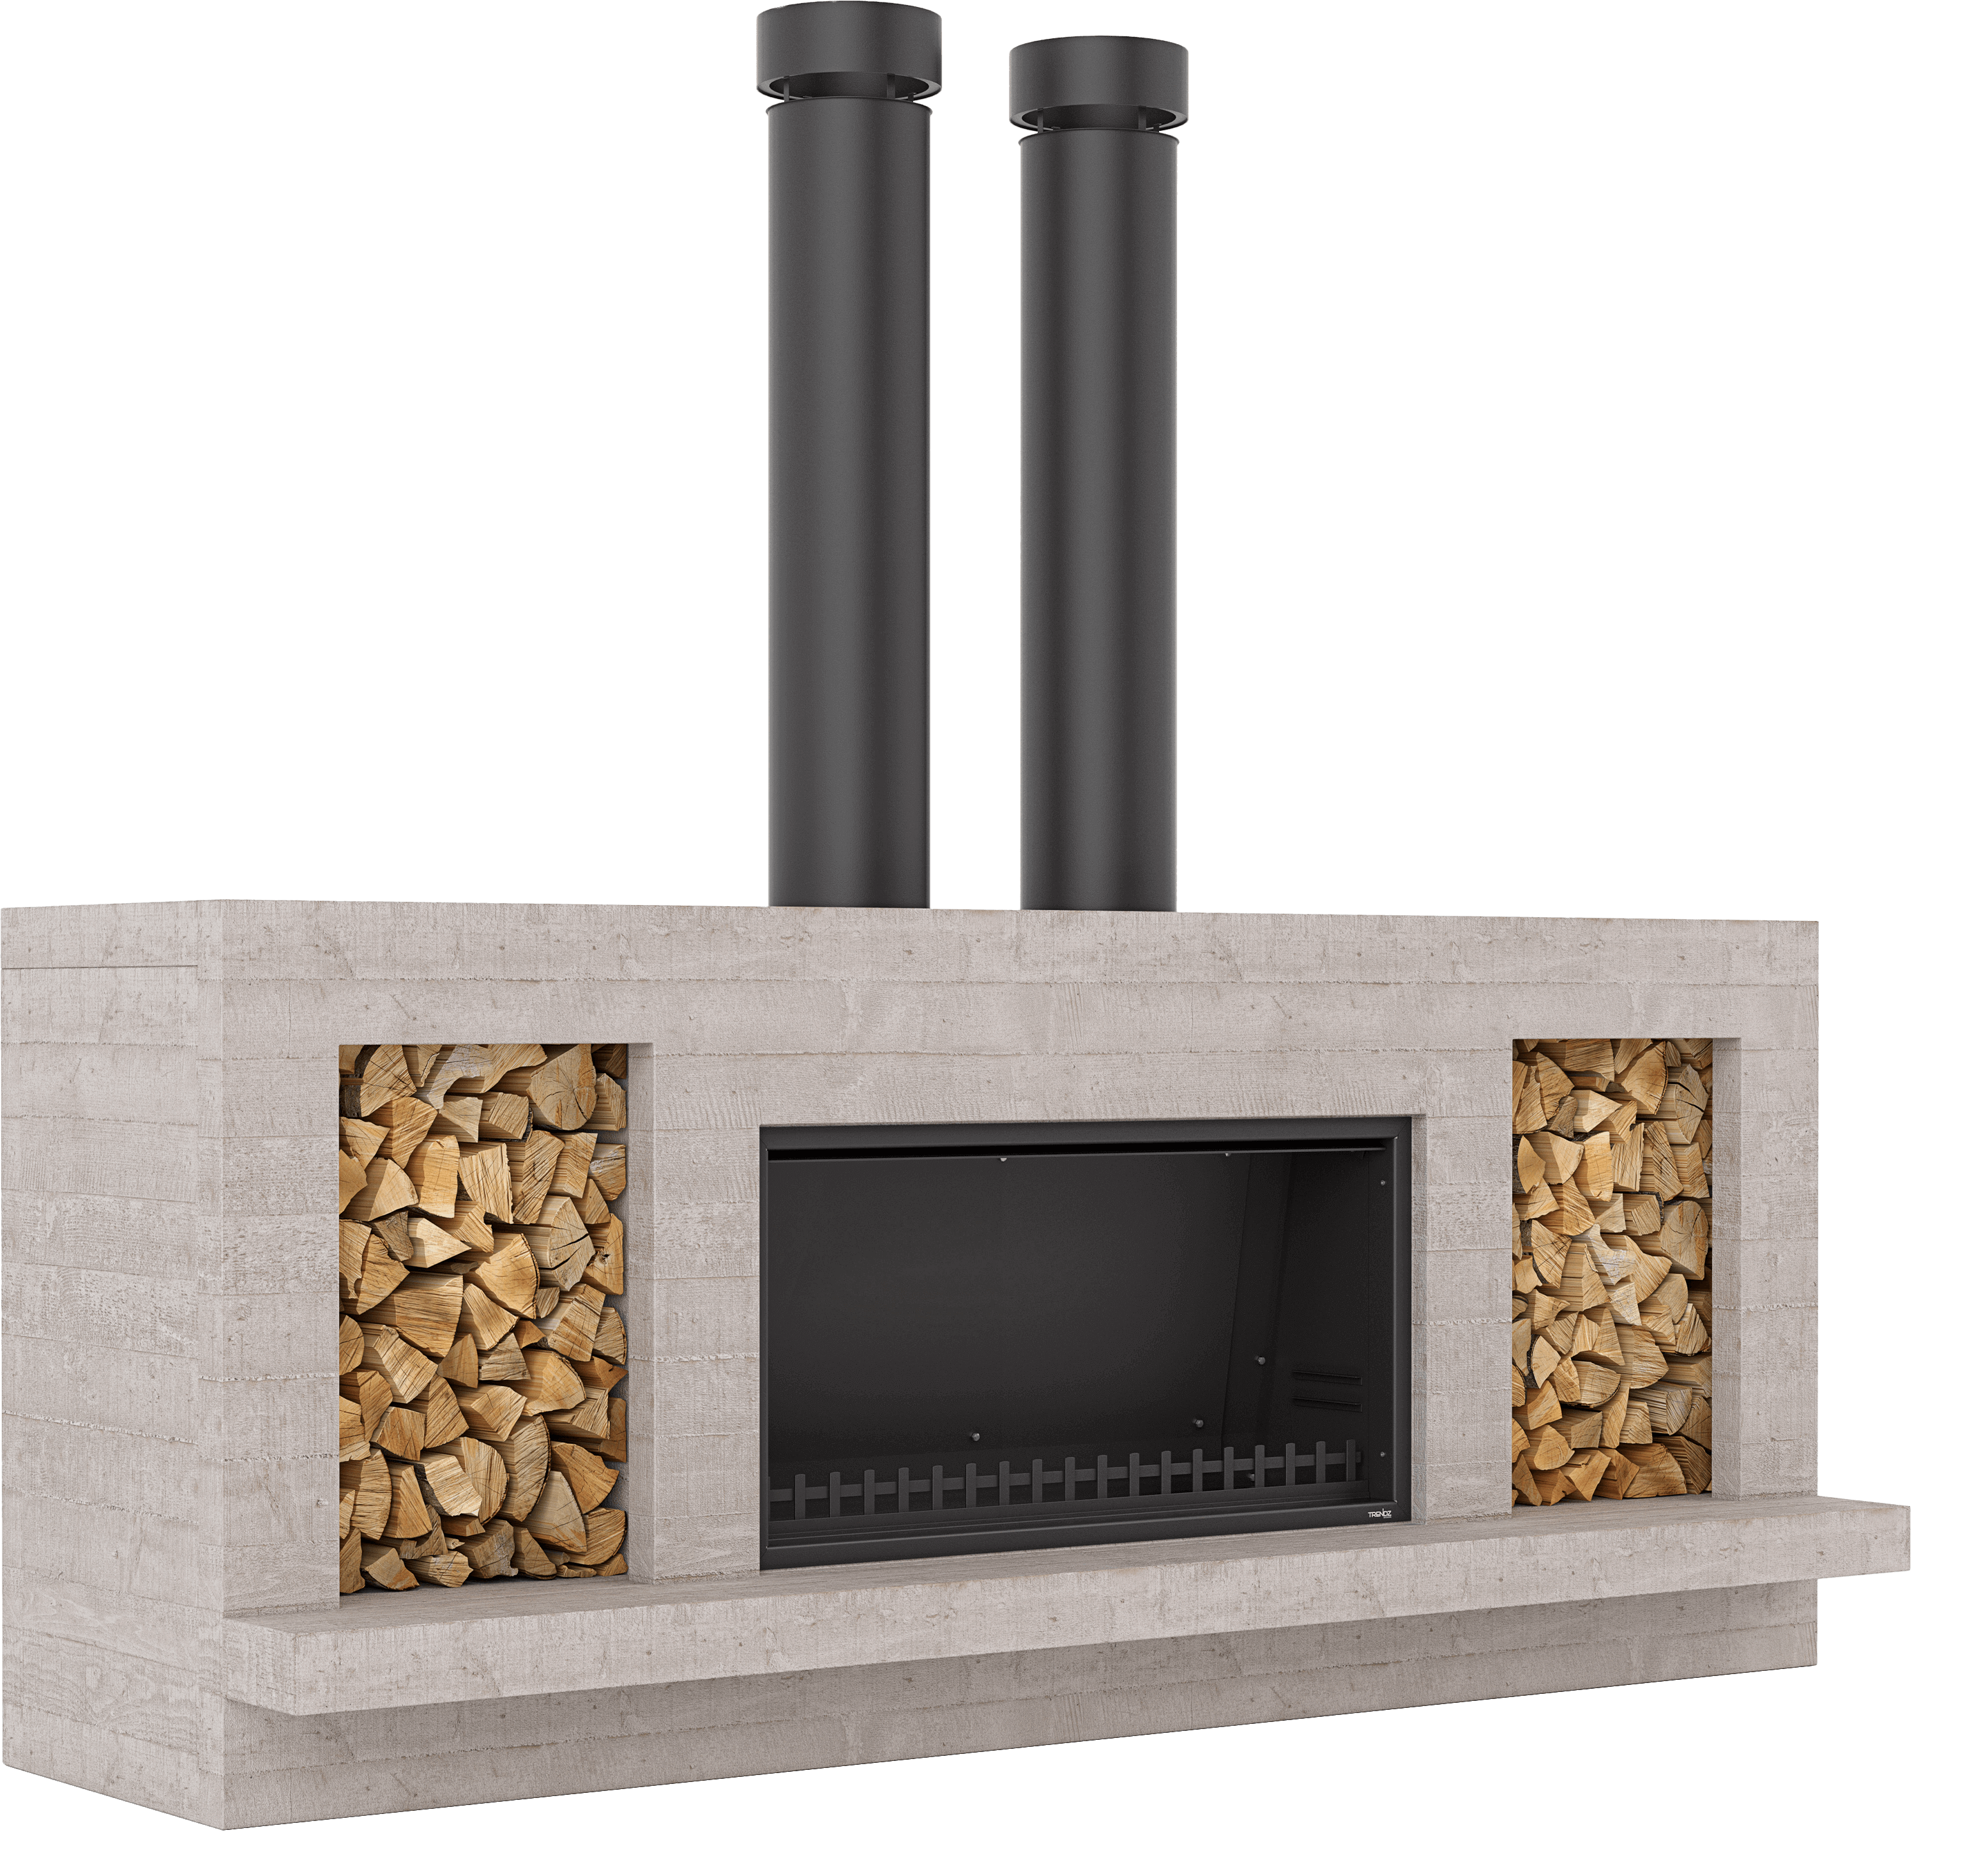 Twin Peak fireplace by Trendz Outdoors